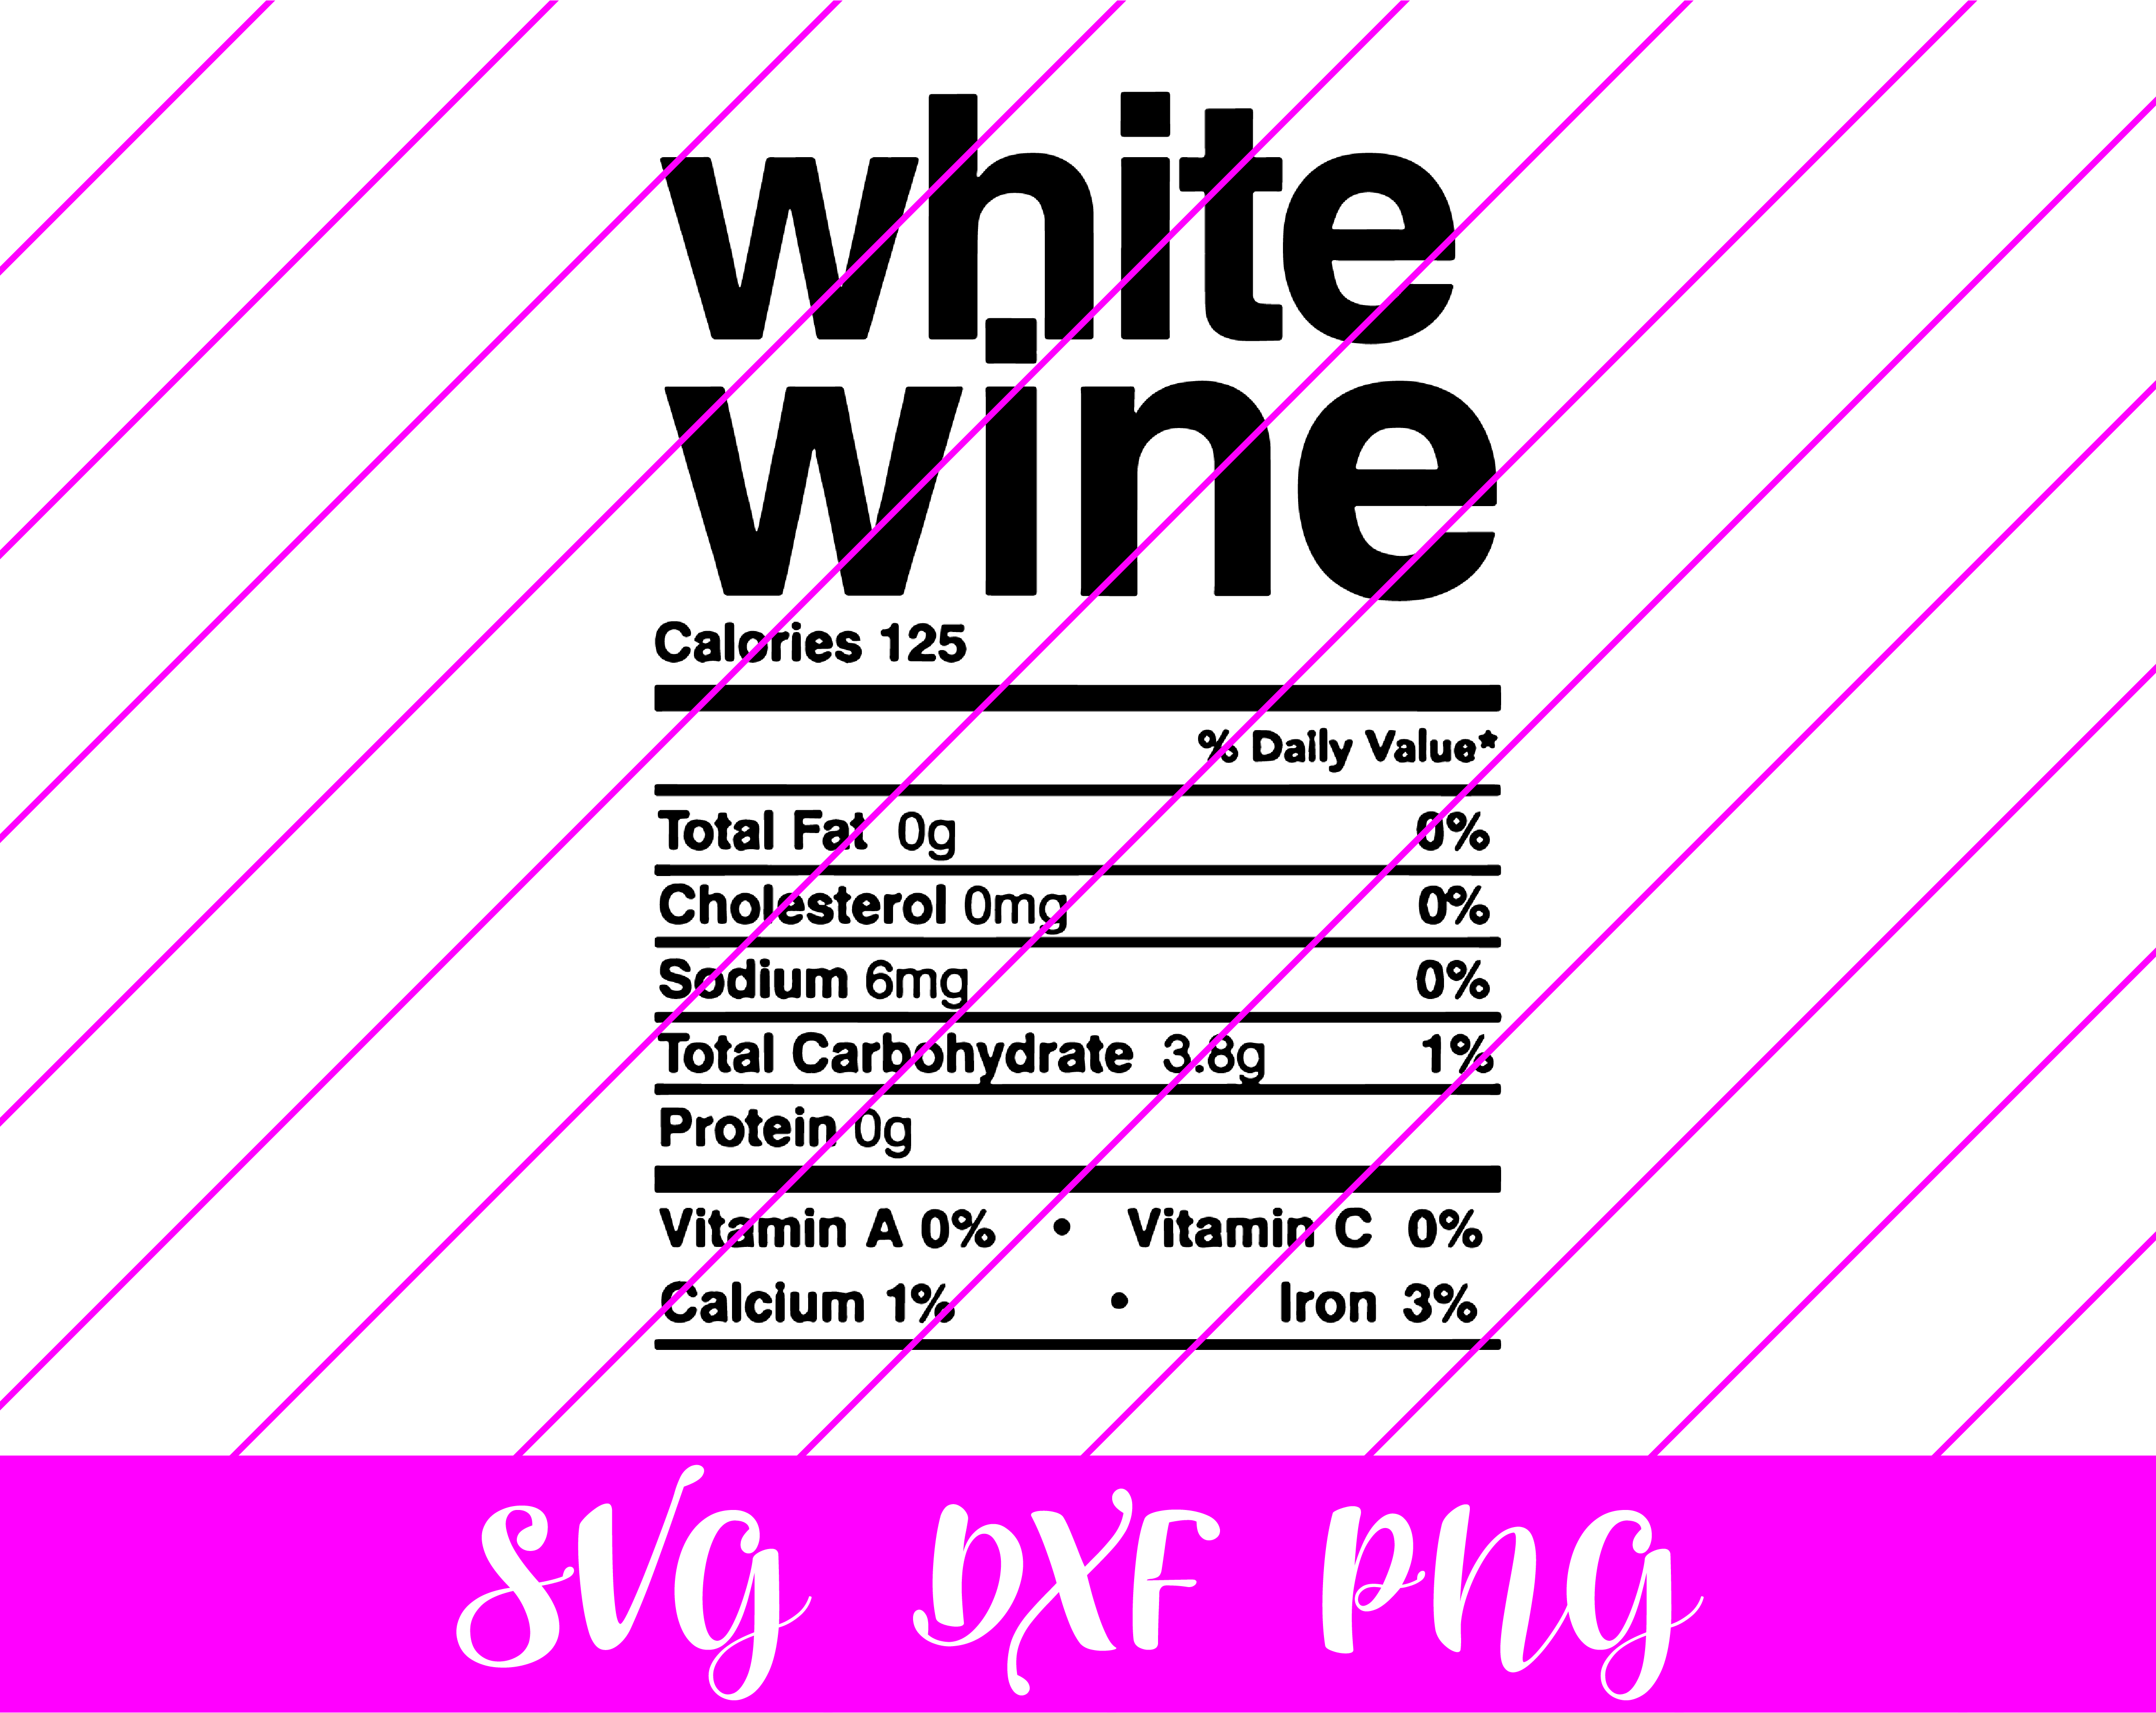 thanksgiving nutrition facts white wine